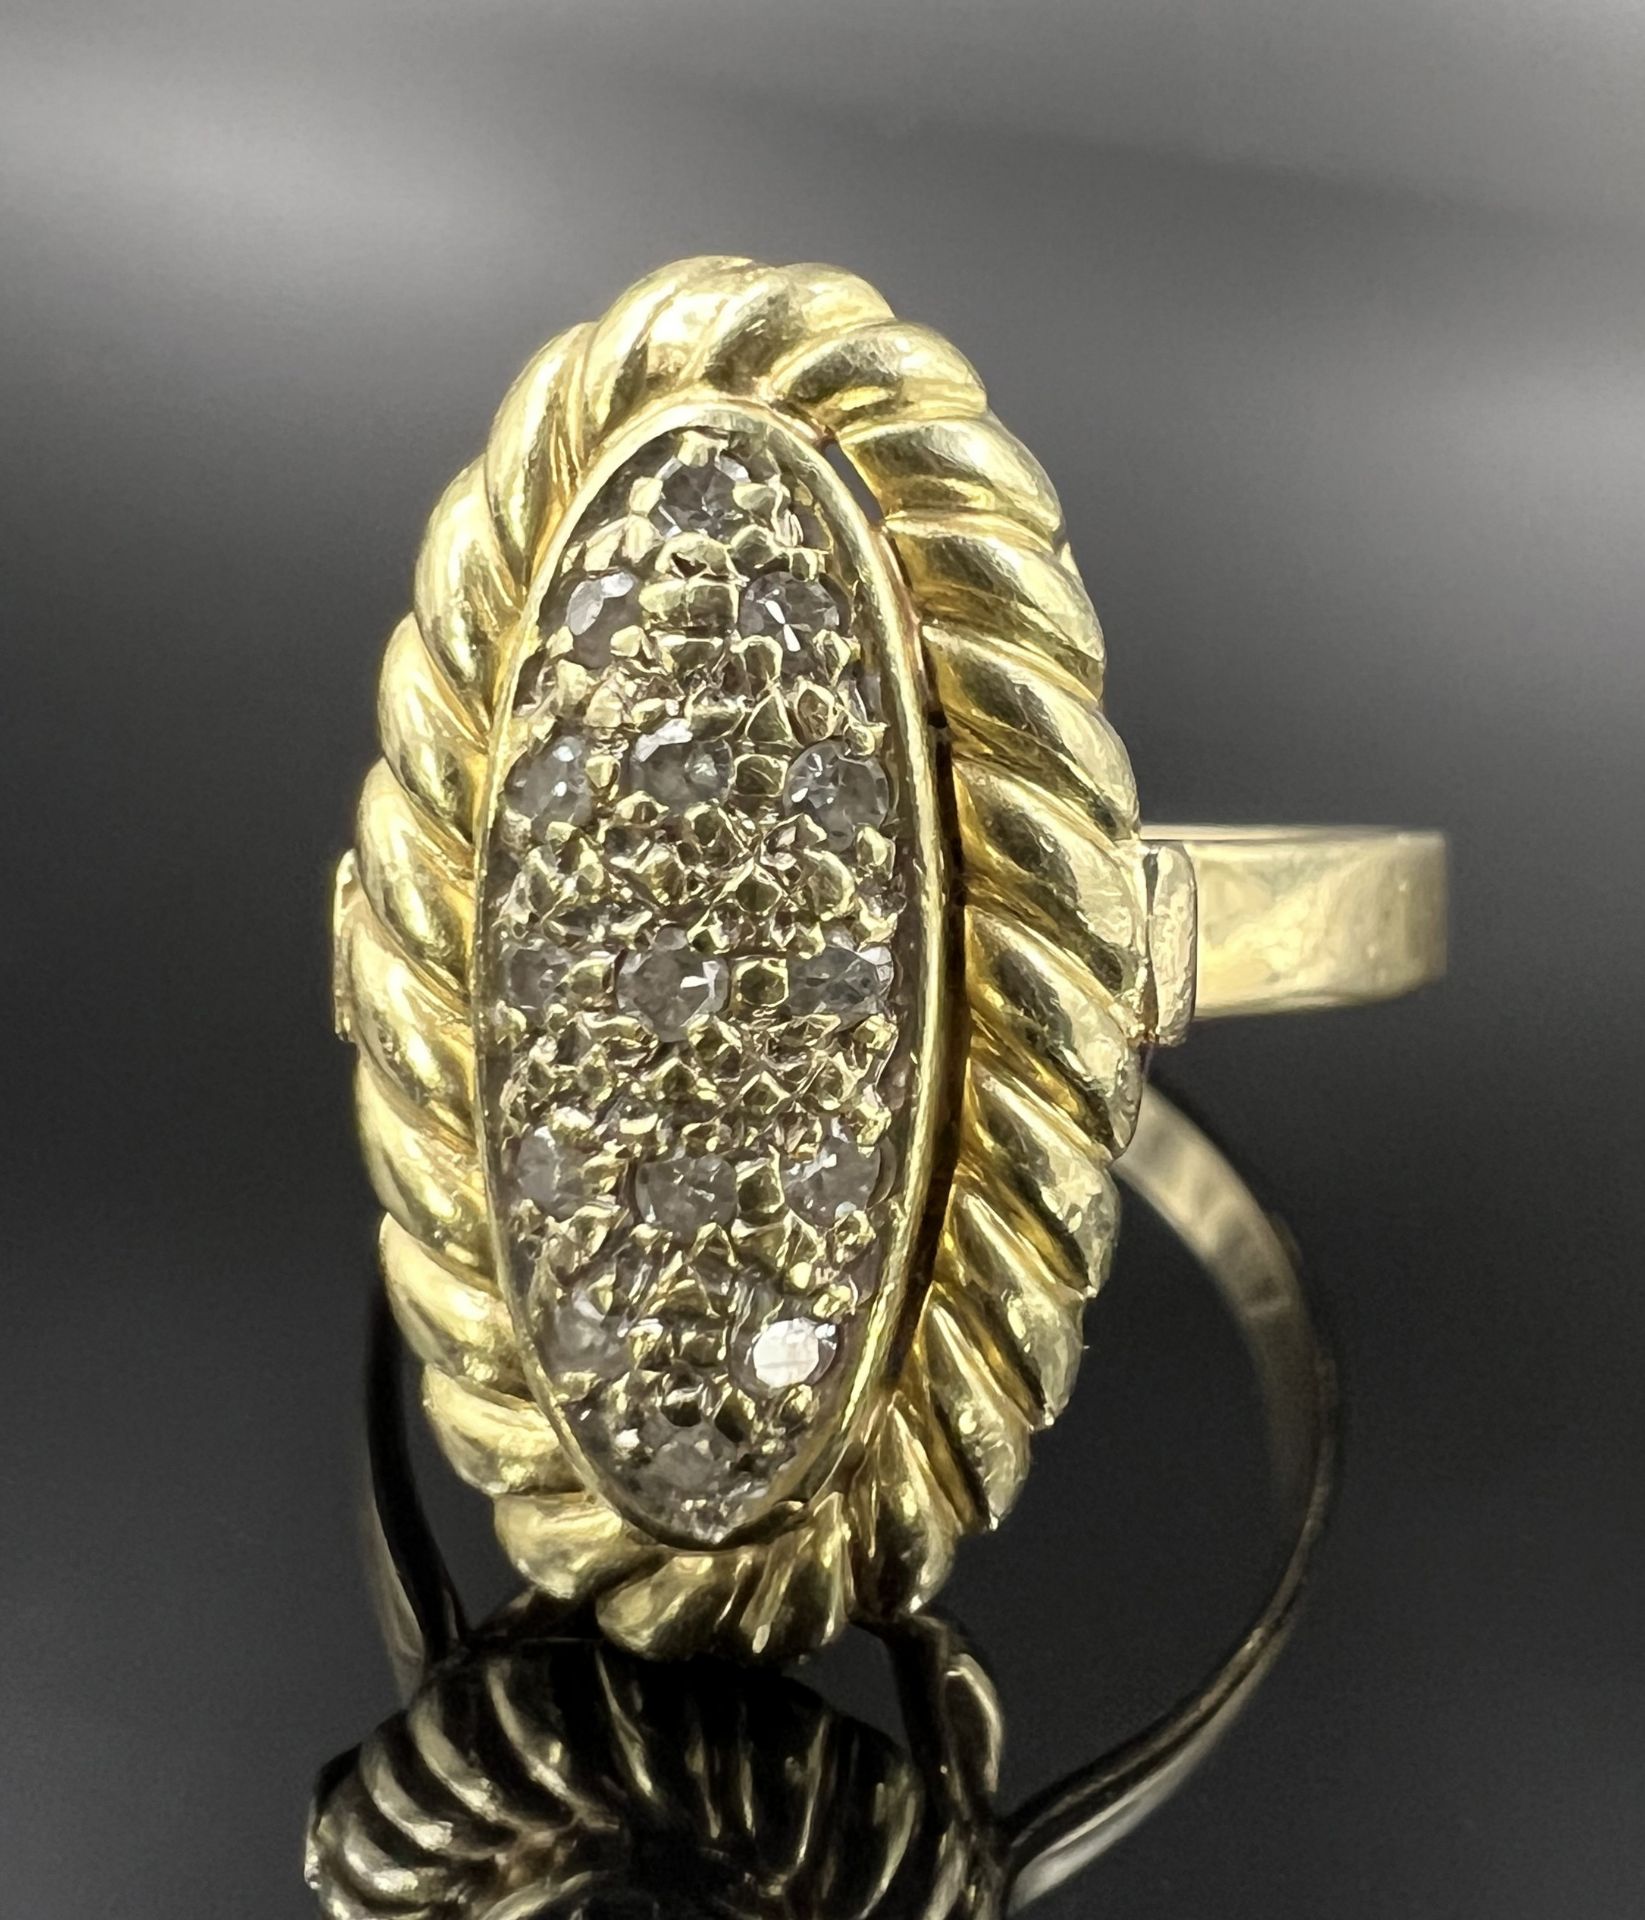 Ladies' ring. 585 yellow gold and white gold with 15 small diamonds.